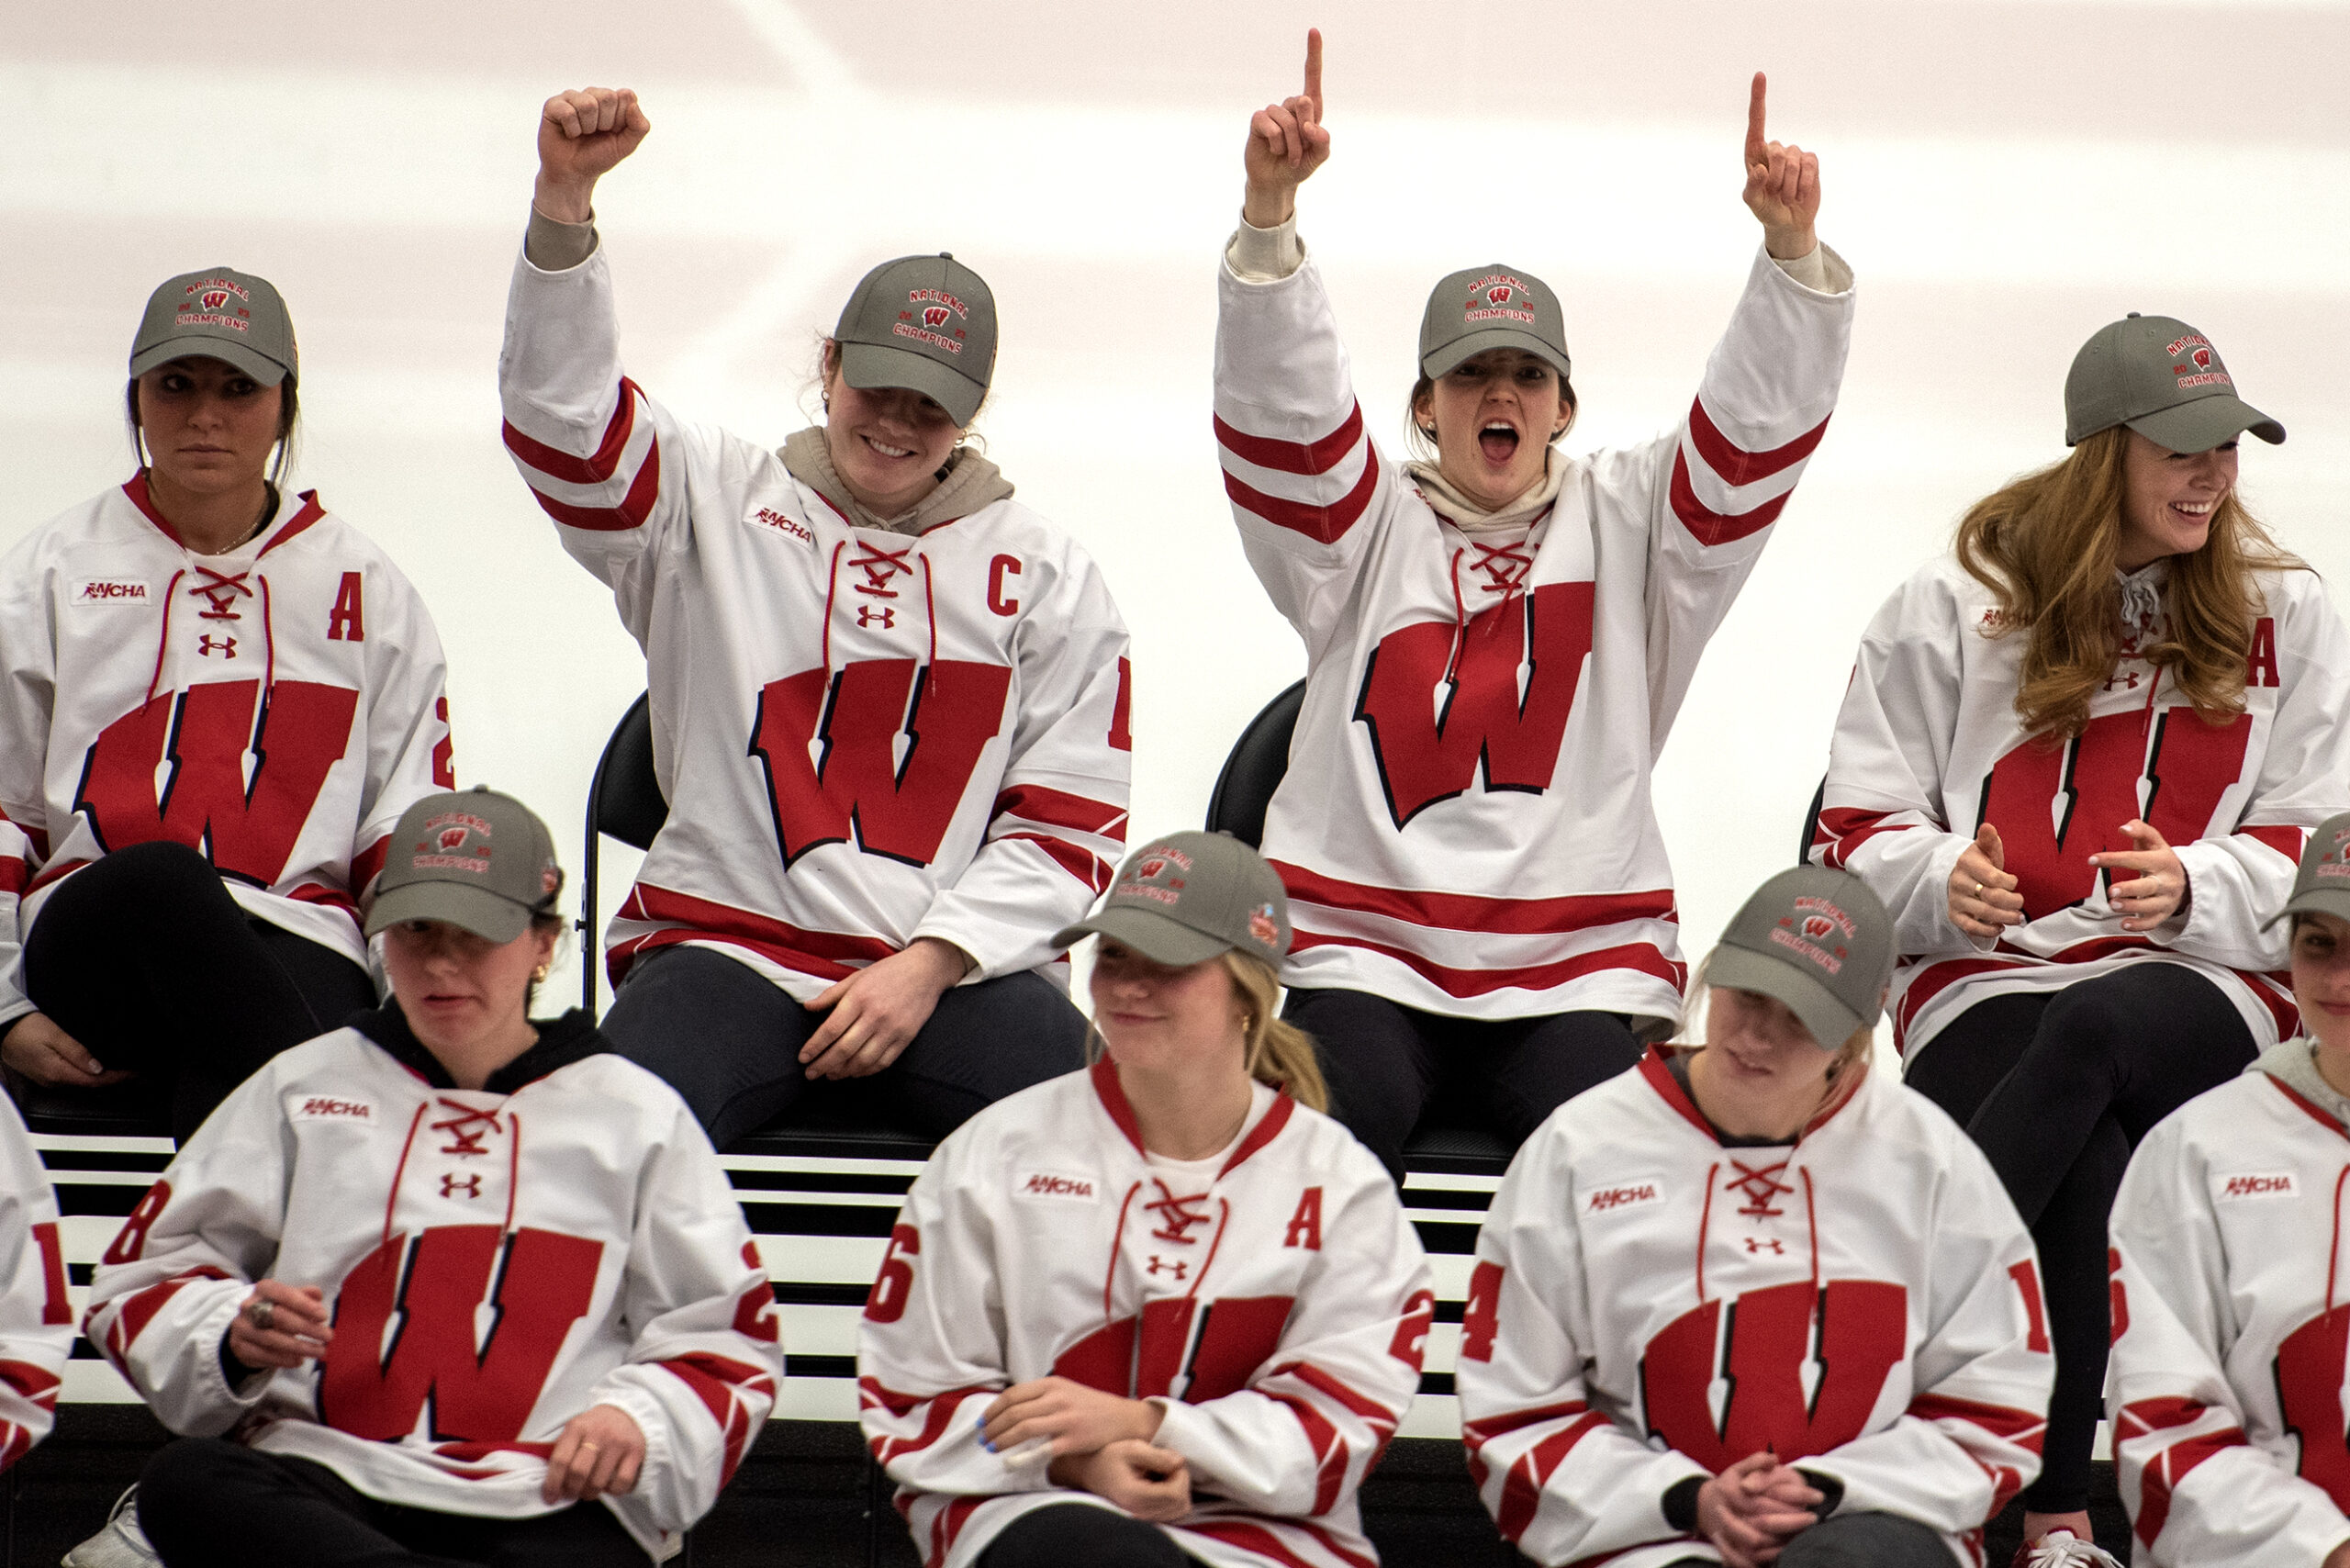 Hockey players sit together in their jerseys on the ice. Two players raise their hands in celebration.